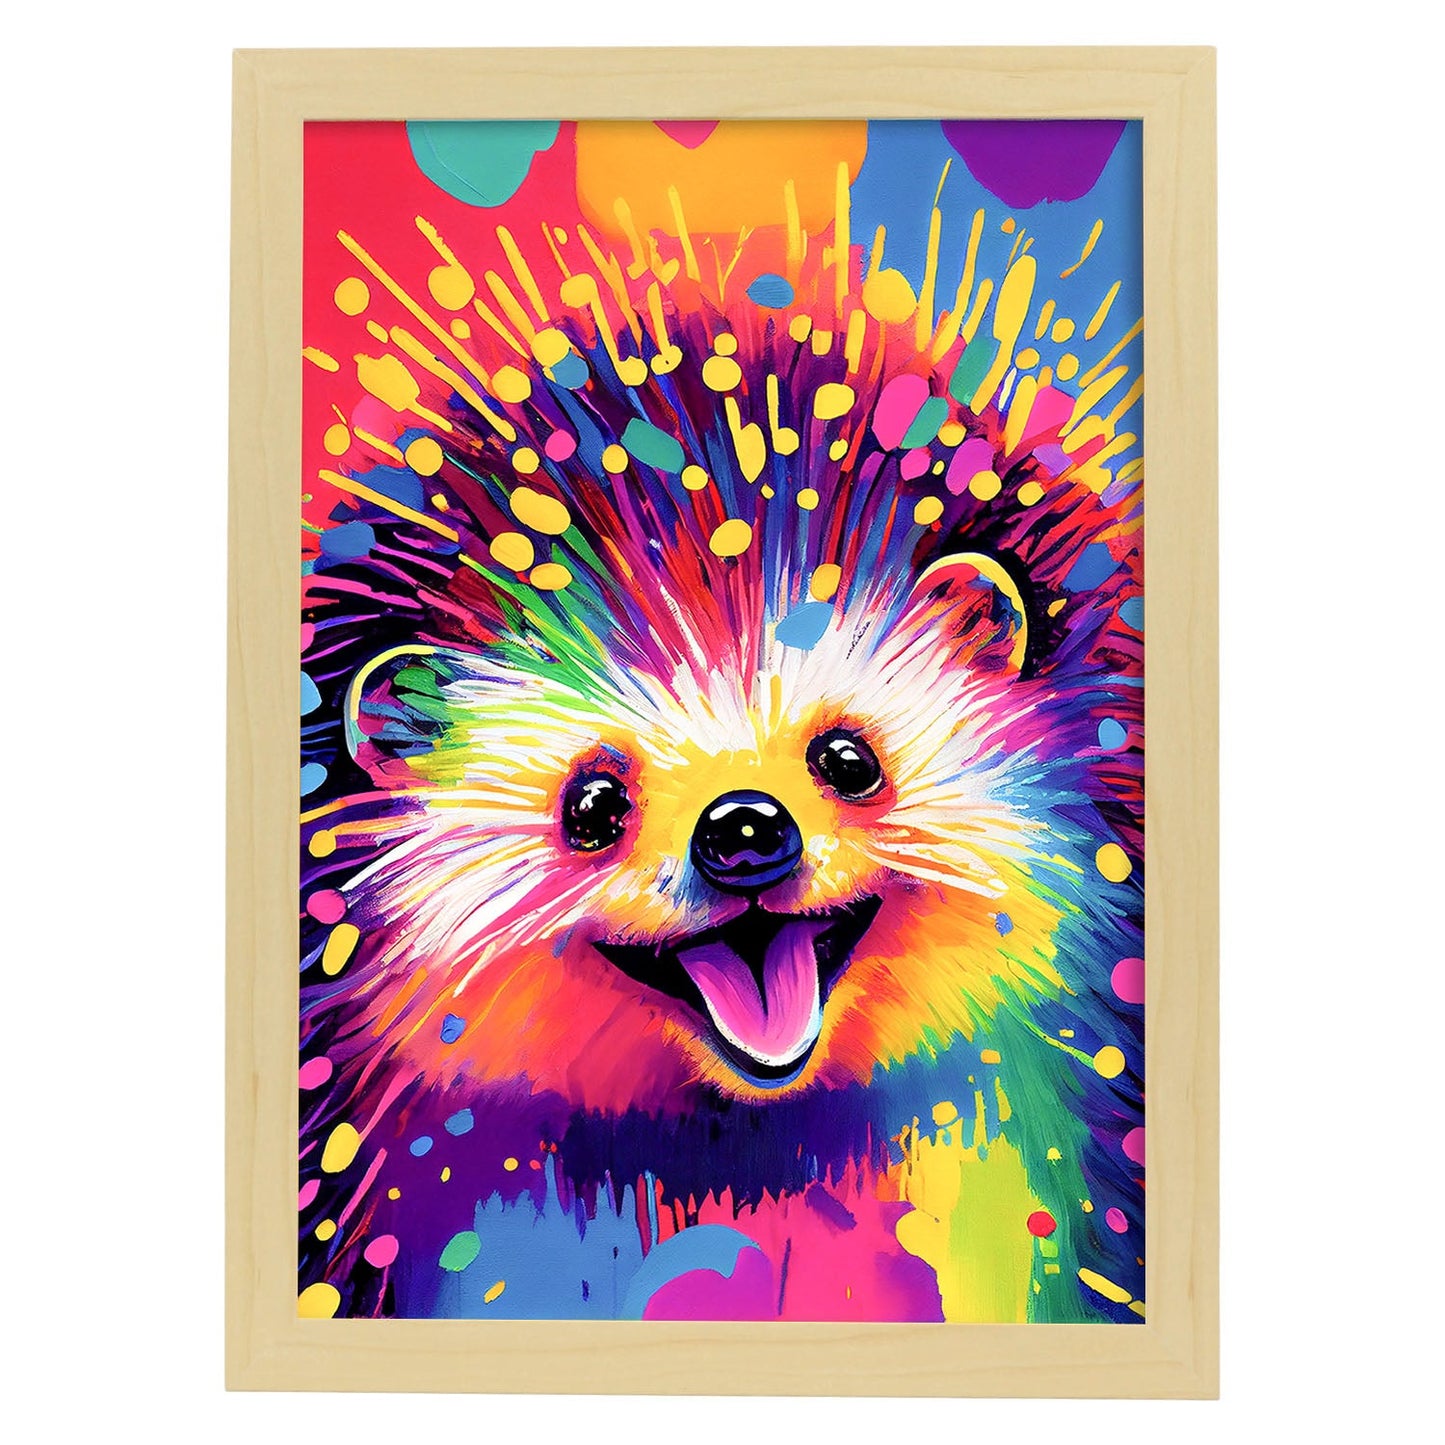 Nacnic Abstract smiling Hedgehog in Lisa Fran Style_1. Aesthetic Wall Art Prints for Bedroom or Living Room Design.